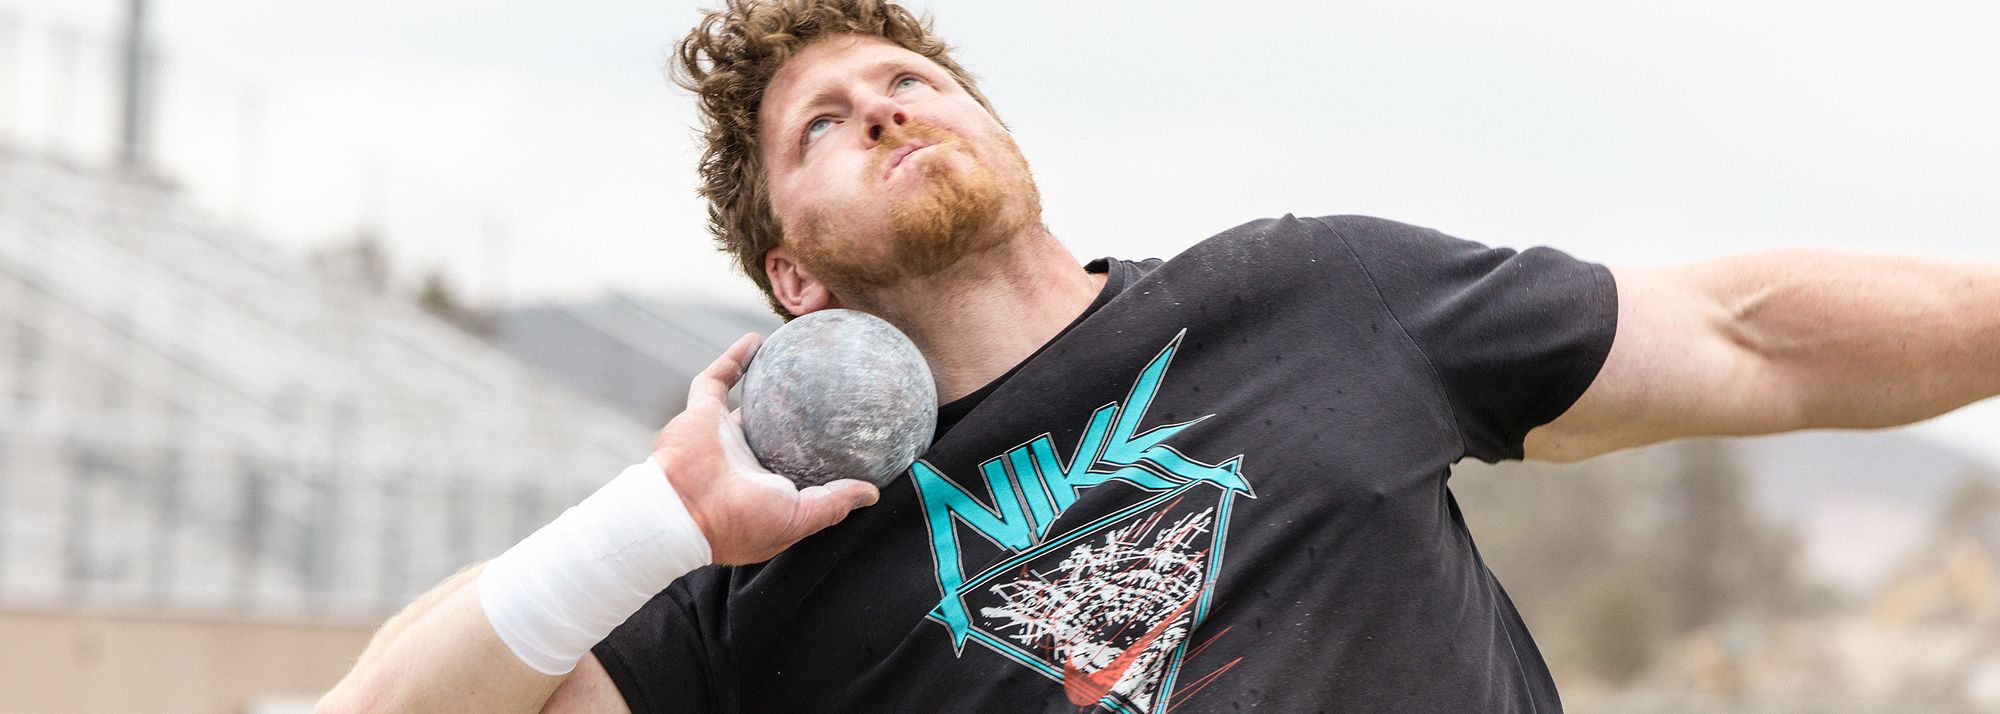 Here’s the thing about the perfect throw: it doesn’t exist